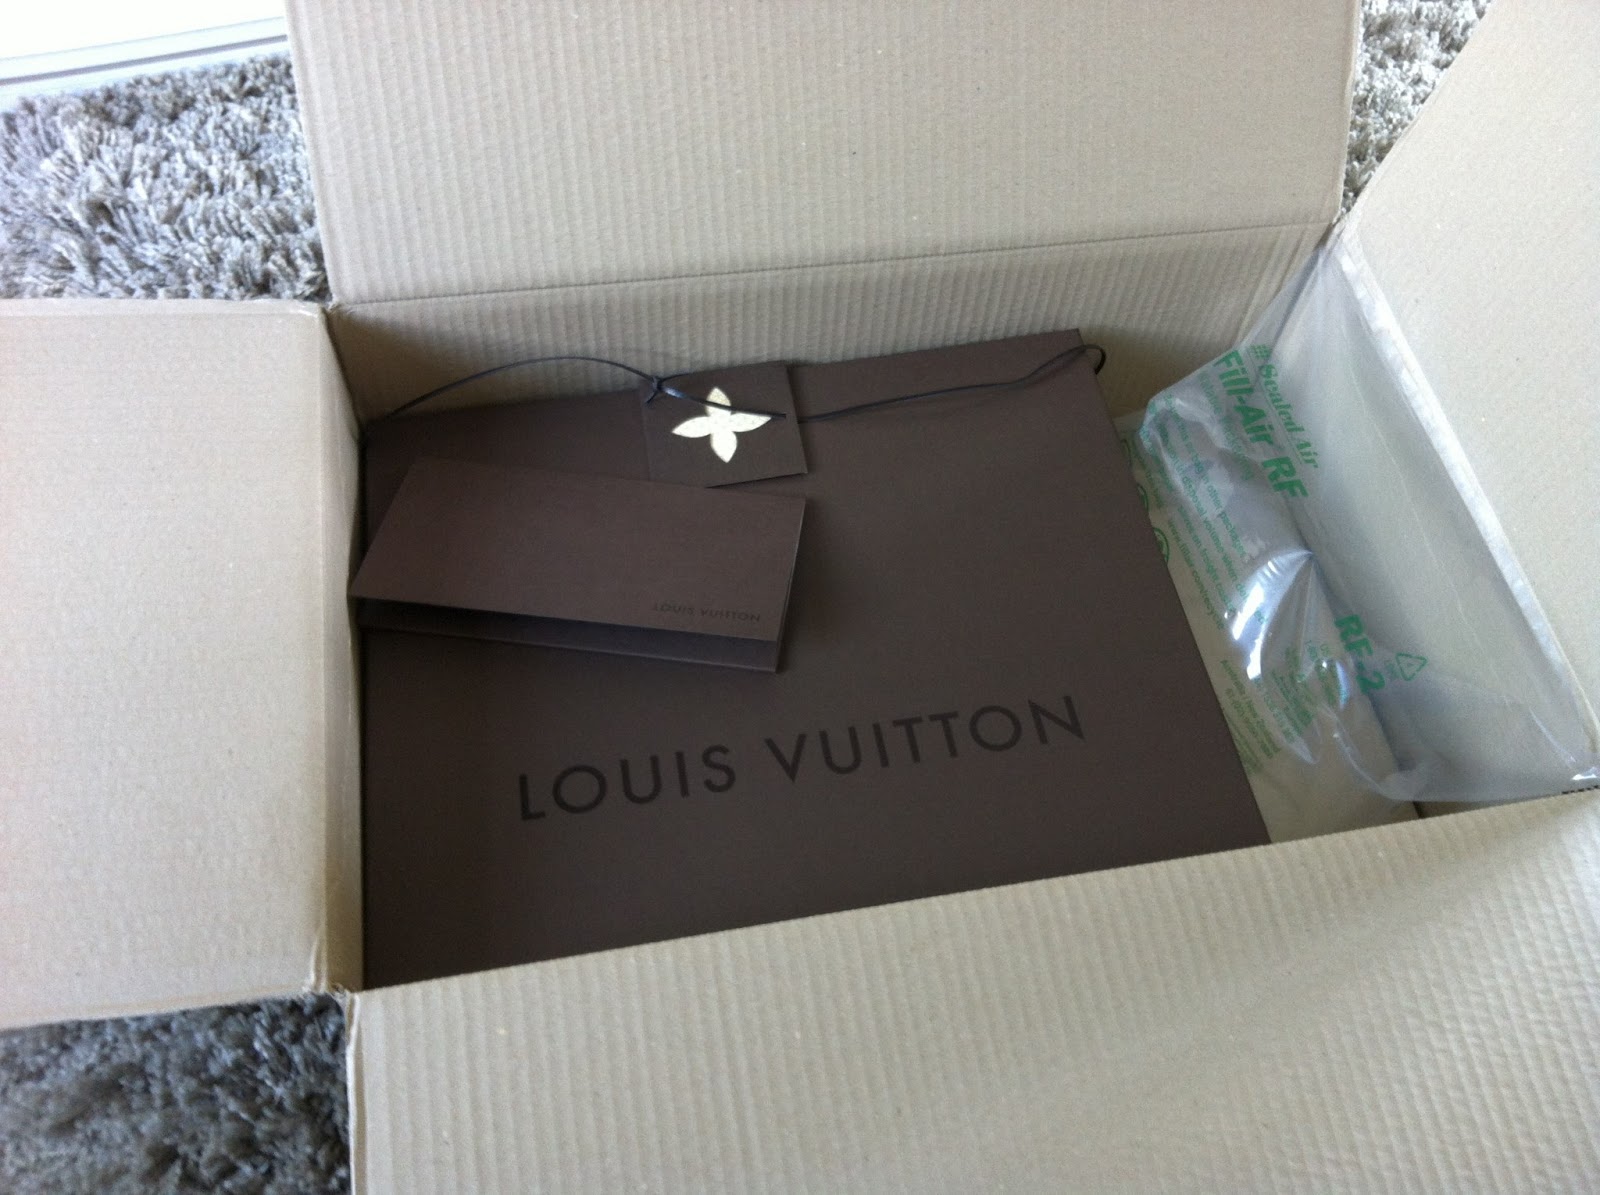 Louis Vuitton Unboxing & First Impression